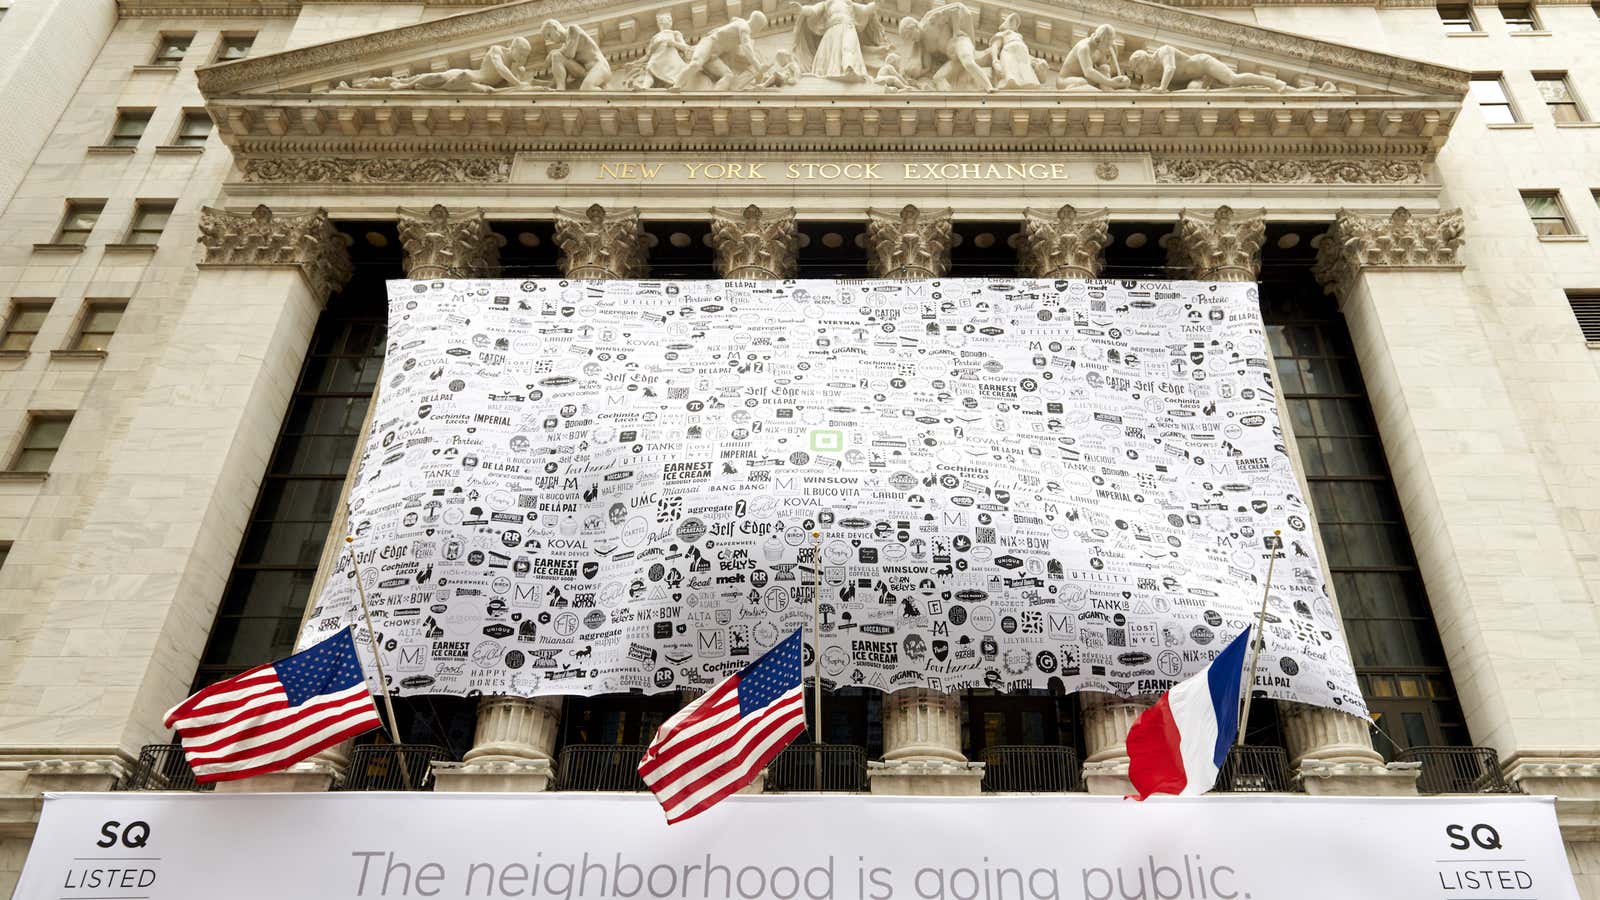 Square’s IPO was quite noteworthy.